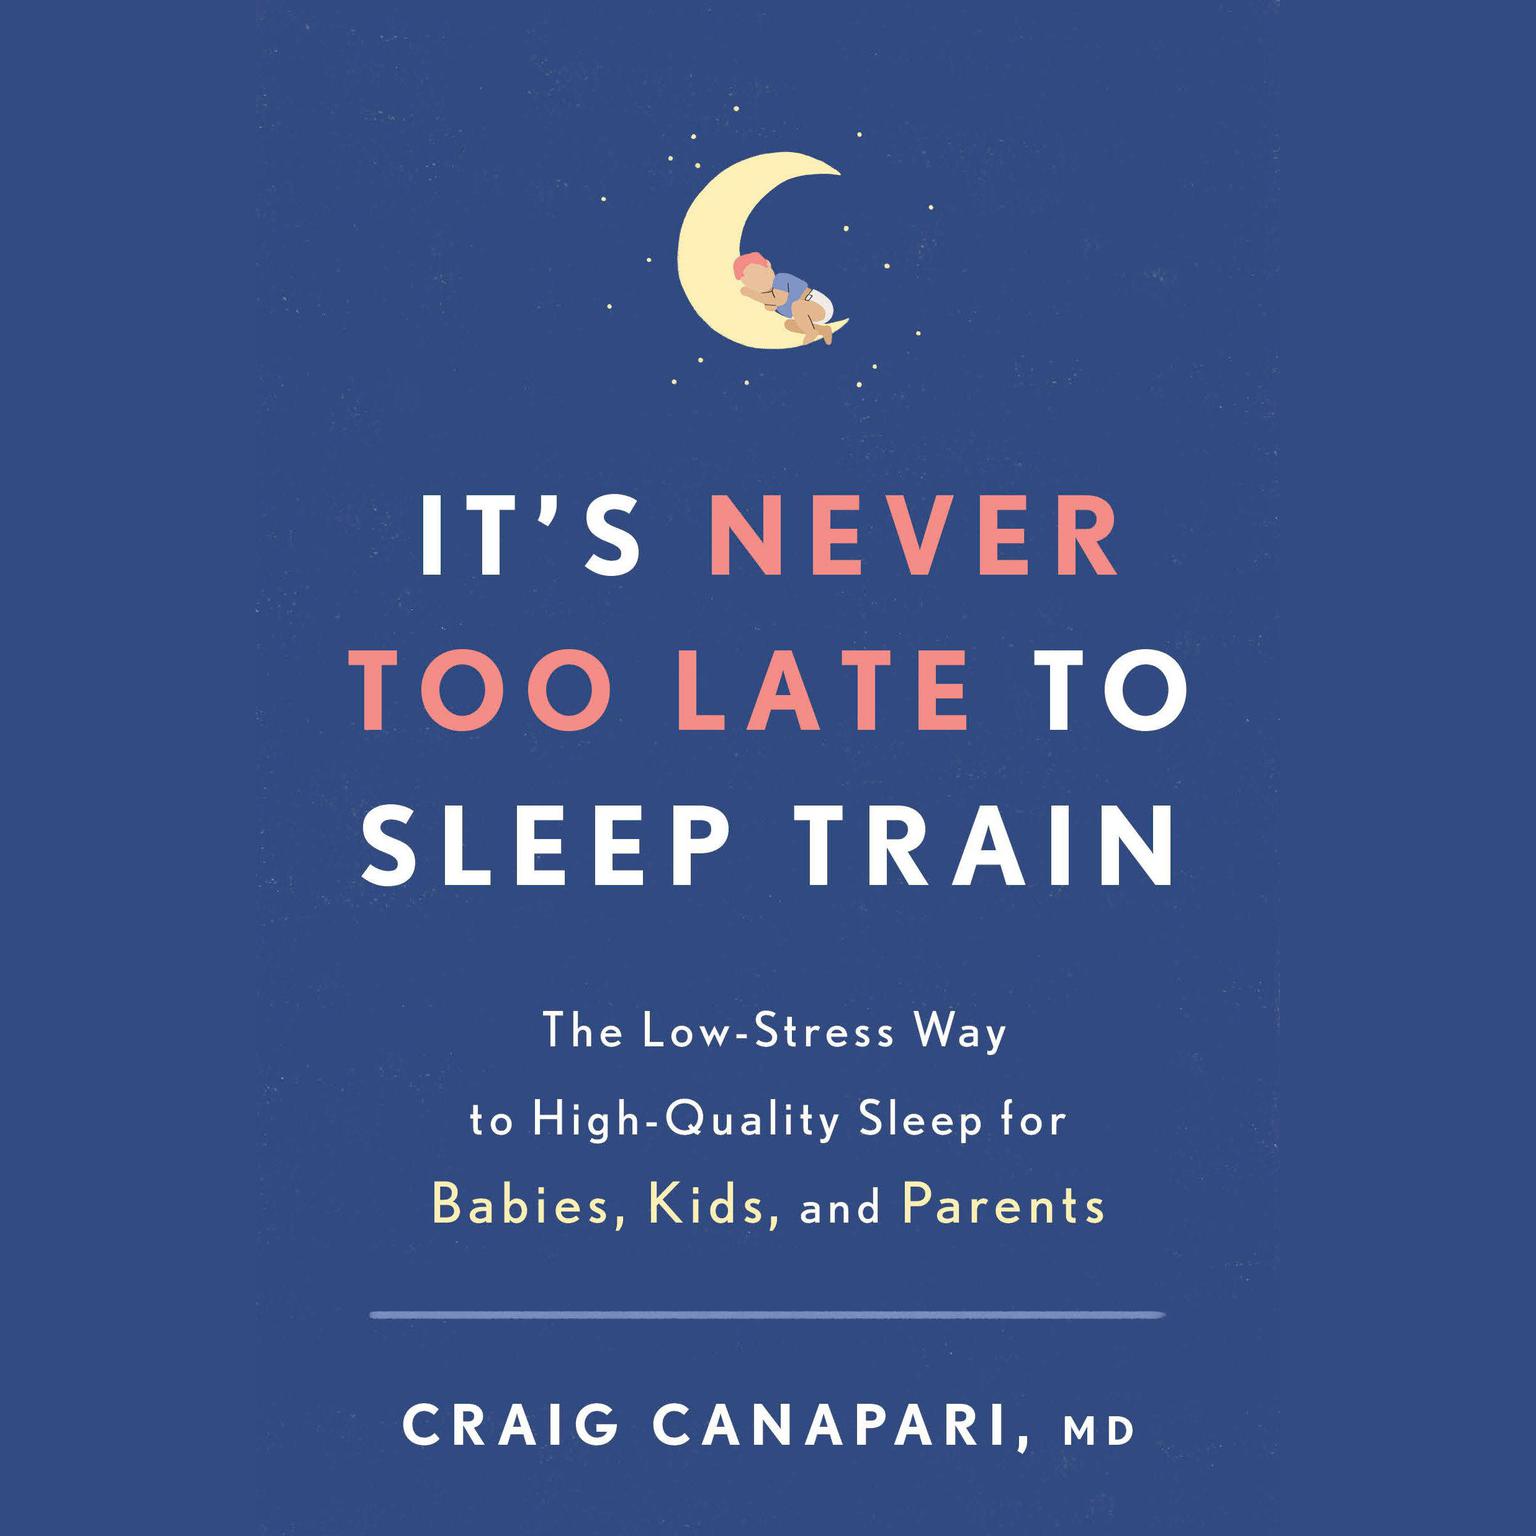 Its Never Too Late to Sleep Train: The Low-Stress Way to High-Quality Sleep for Babies, Kids, and Parents Audiobook, by Craig Canapari